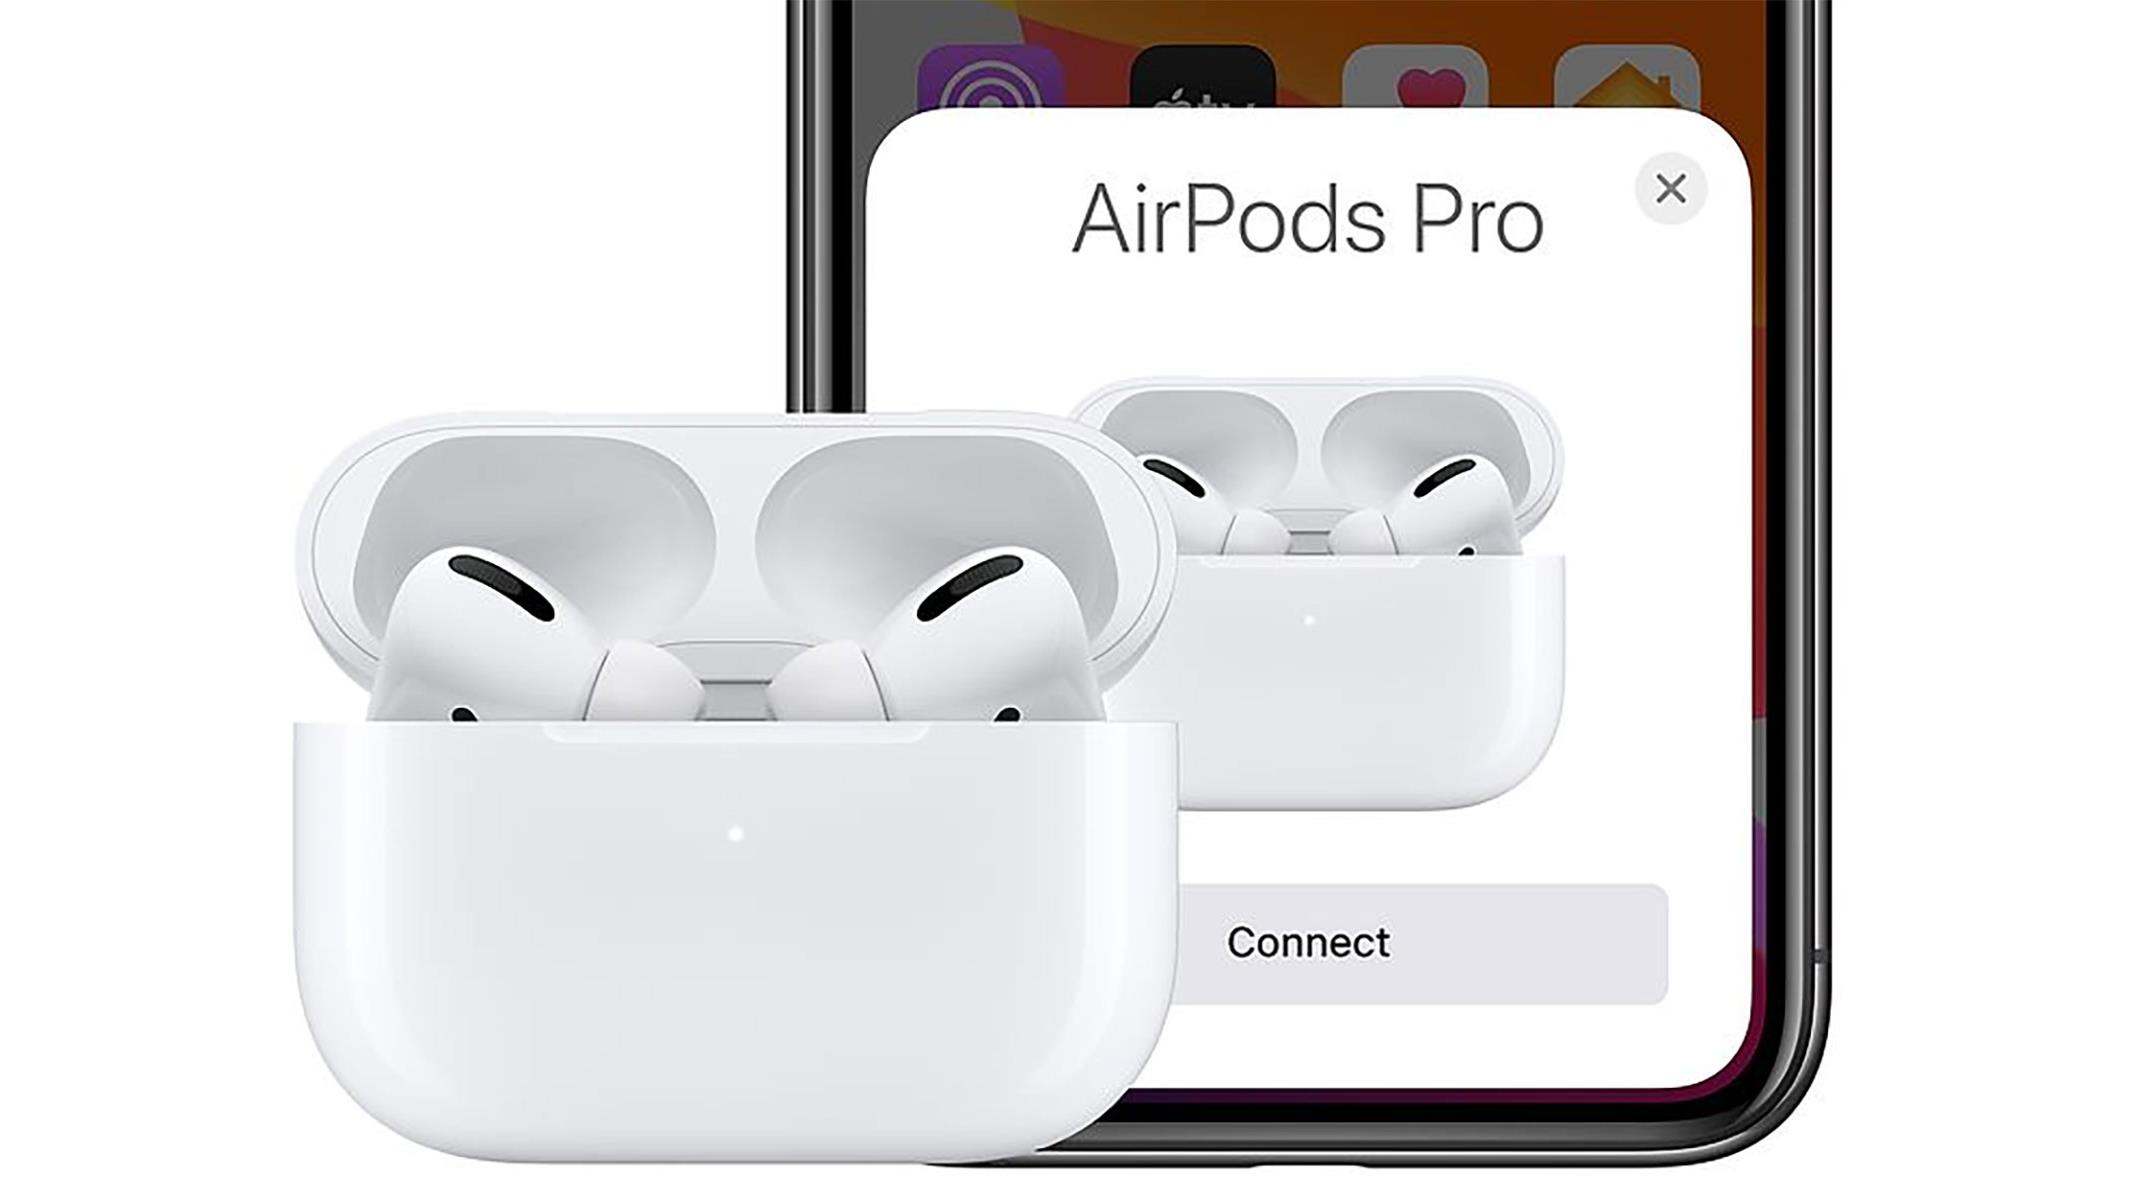 Номер наушники airpods. AIRPODS Pro Premium. AIRPODS лого. IMEI AIRPODS Pro. AIRPODS Max Space Gray.